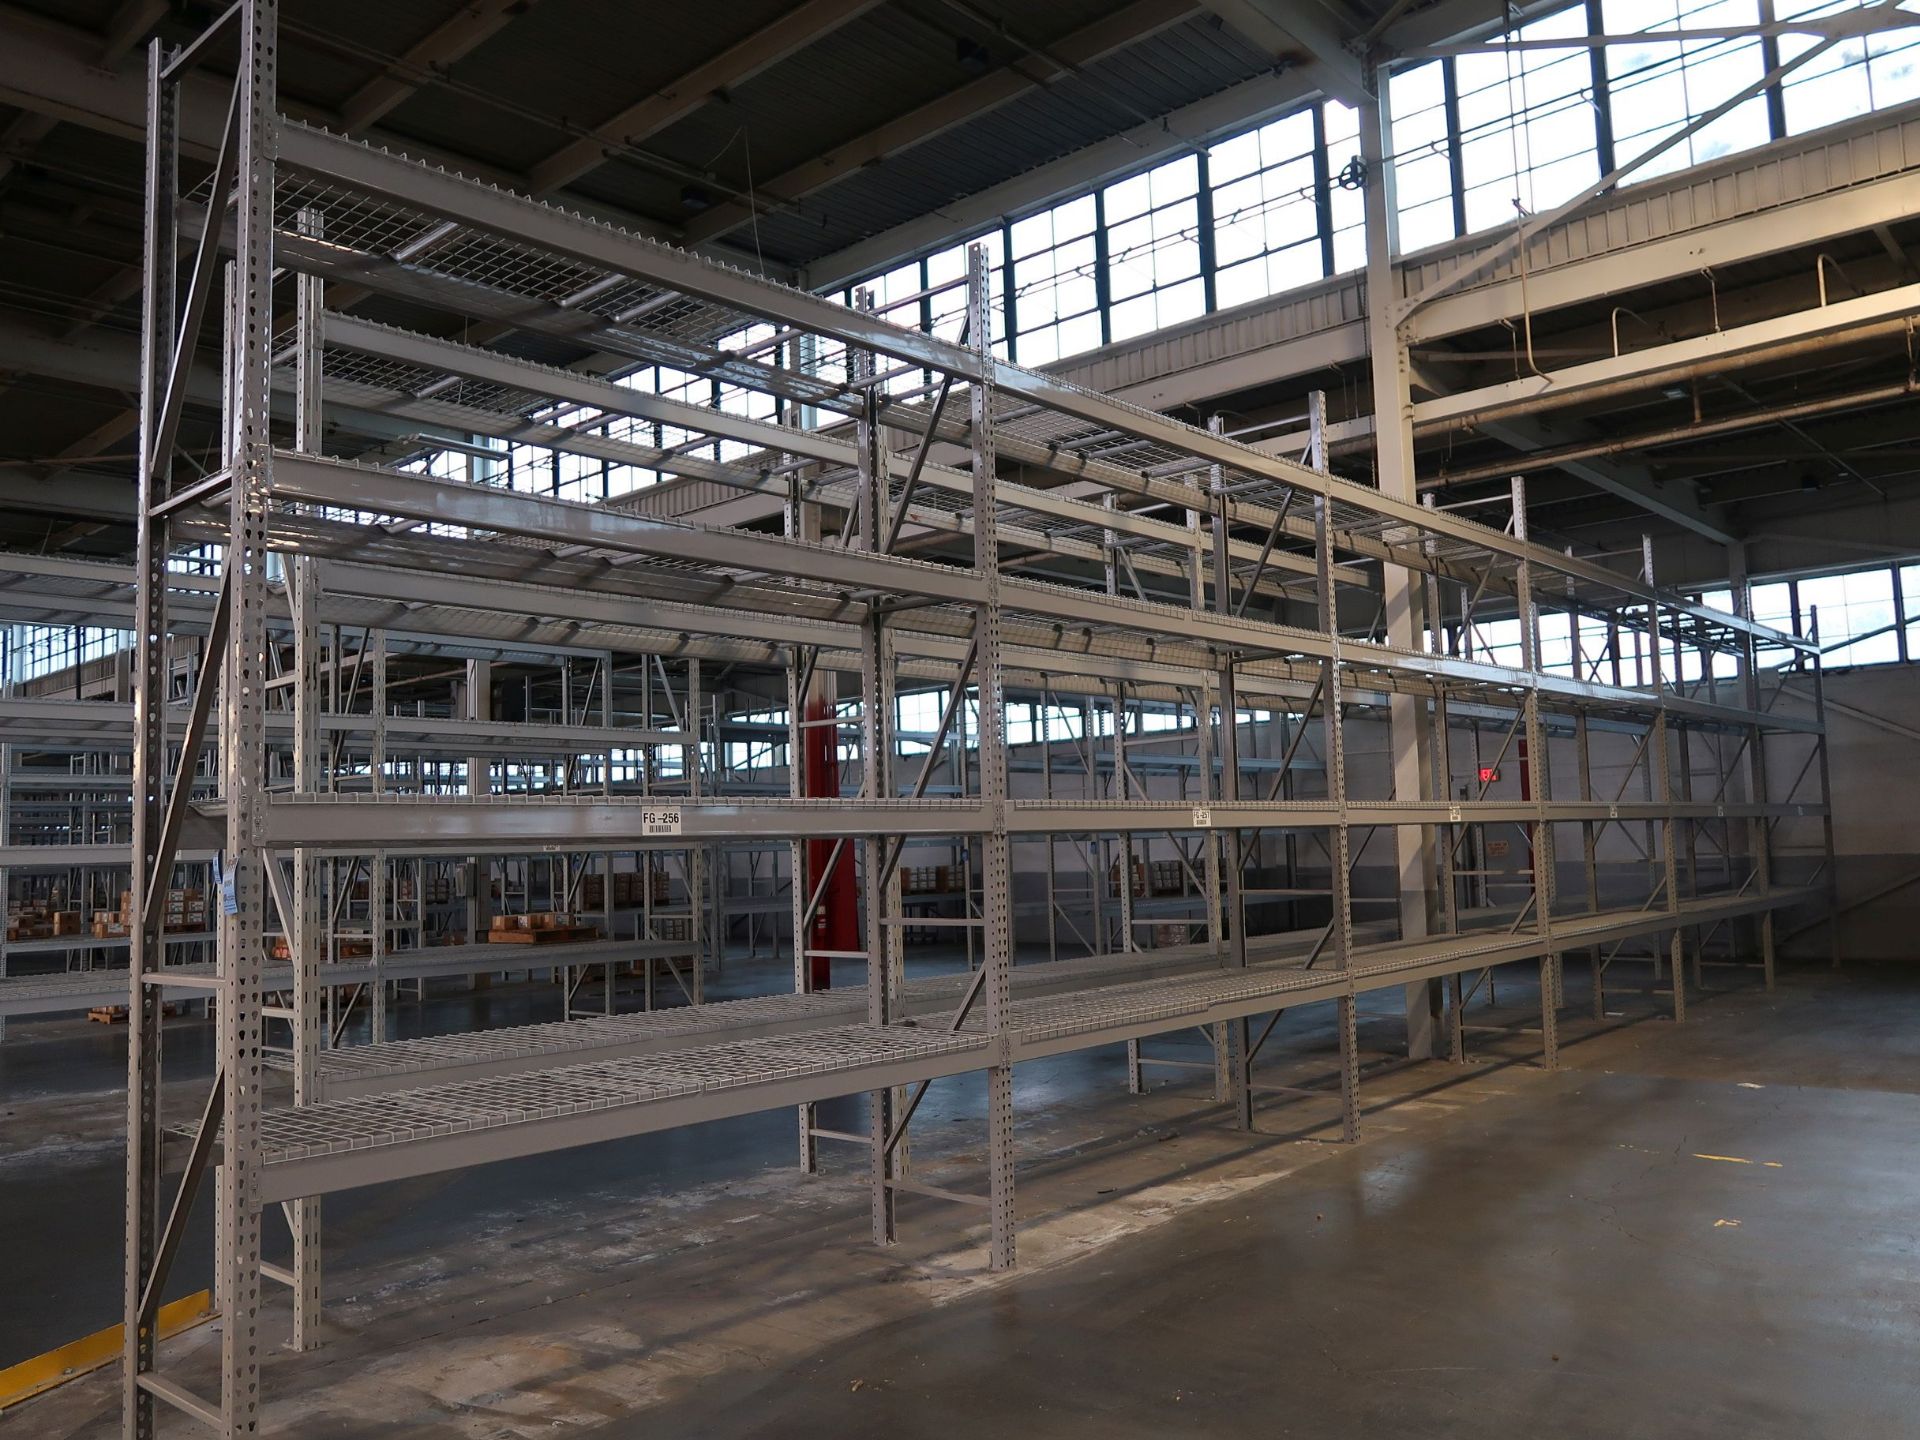 SECTIONS 124" X 32" X 180" TEAR DROP TYPE ADJUSTABLE BEAM PALLET RACKS WITH (7) 32" X 180" UPRIGHTS,